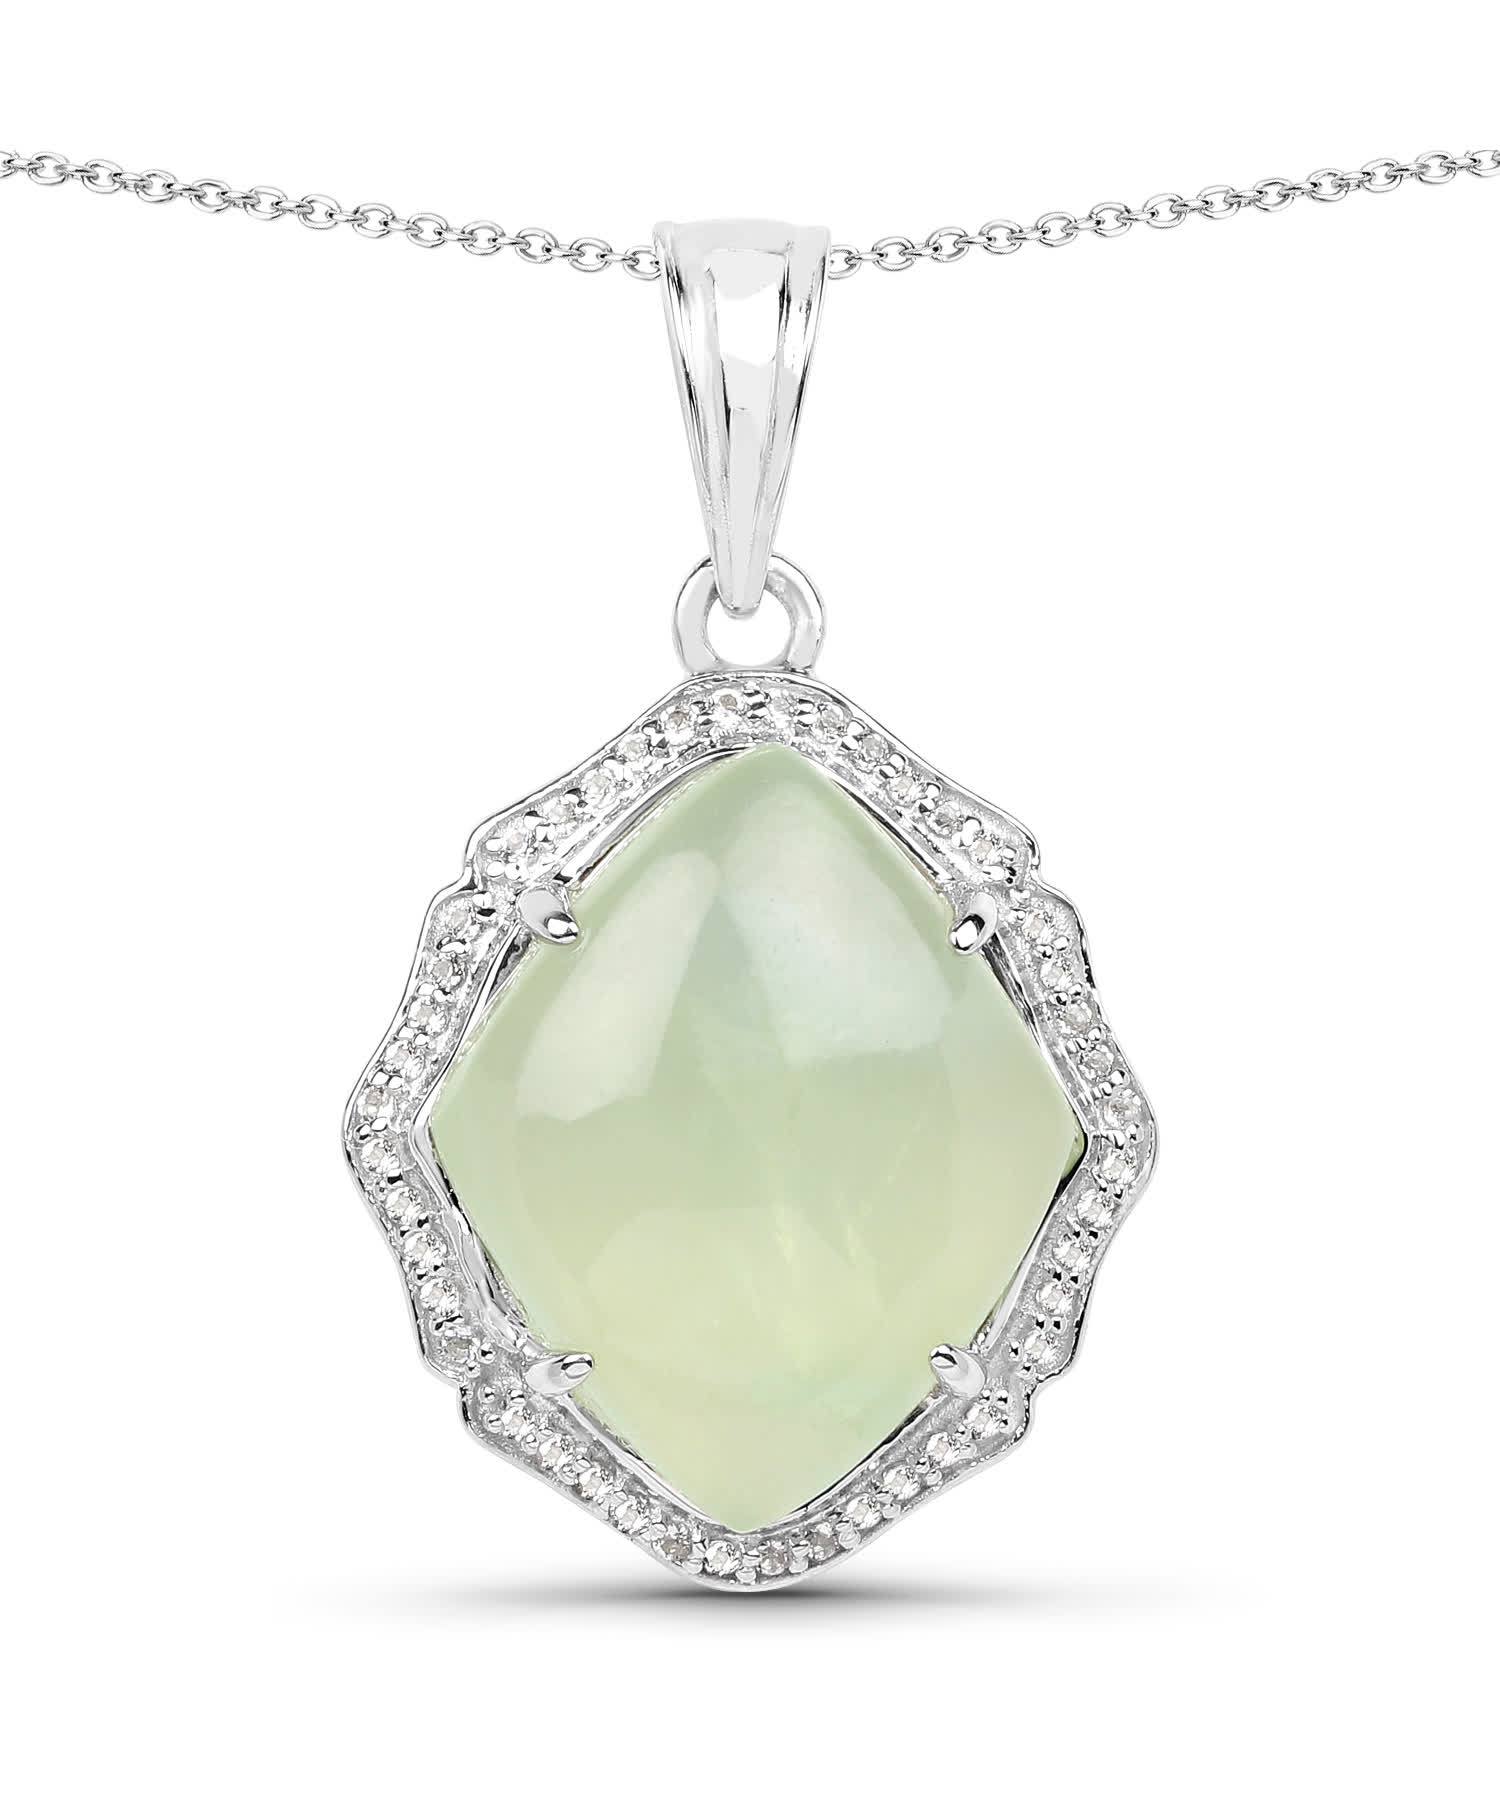 7.49ctw Natural Prehnite and Topaz Rhodium Plated 925 Sterling Silver Pendant With Chain View 1